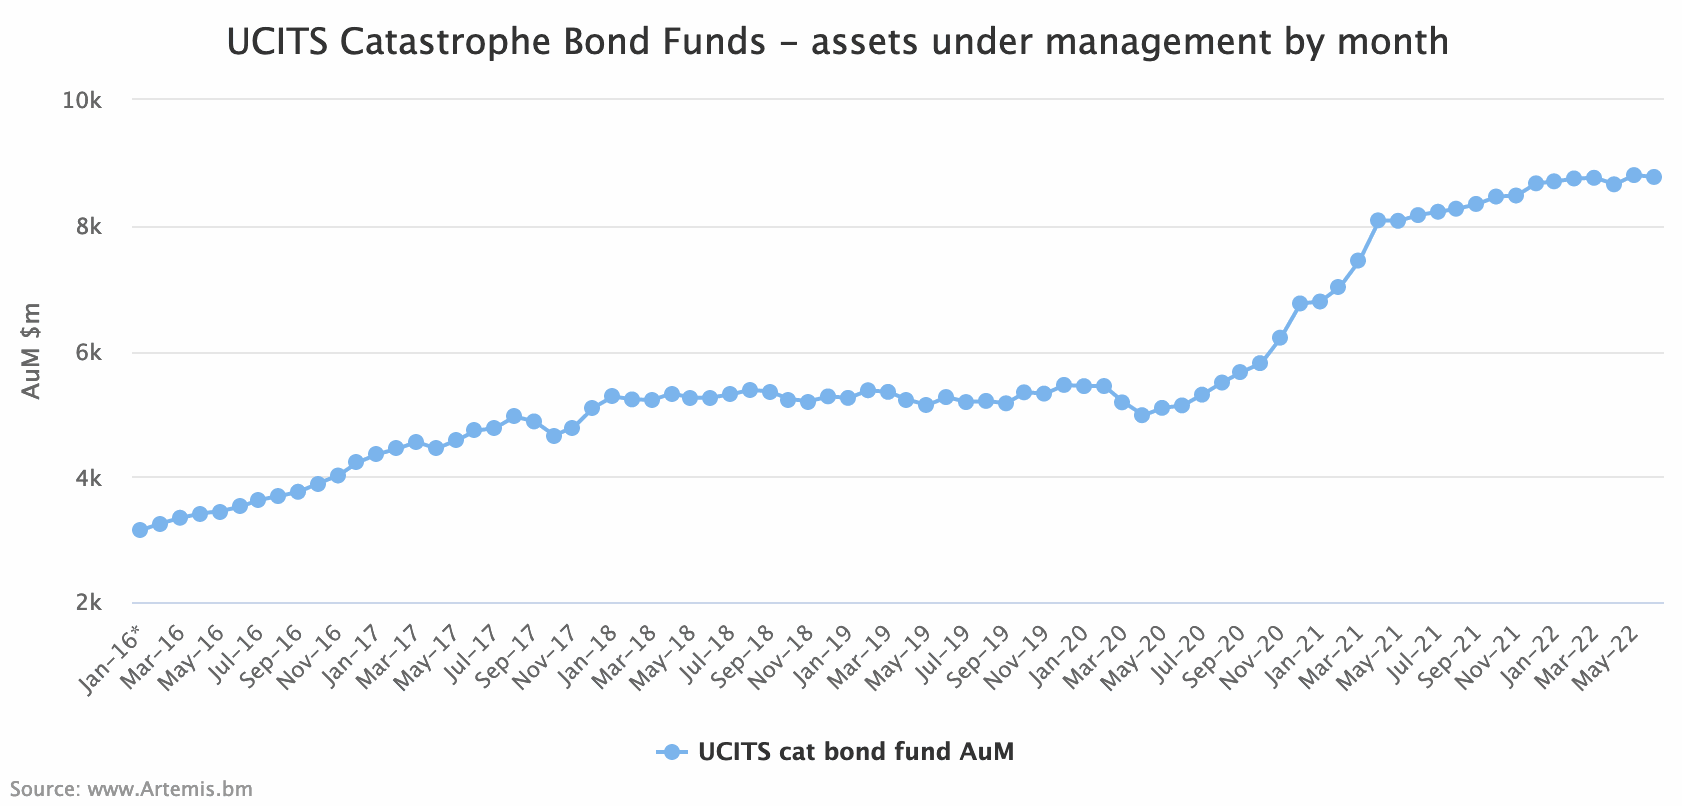 UCITS catastrophe bond fund assets by month - to end Jun 2022